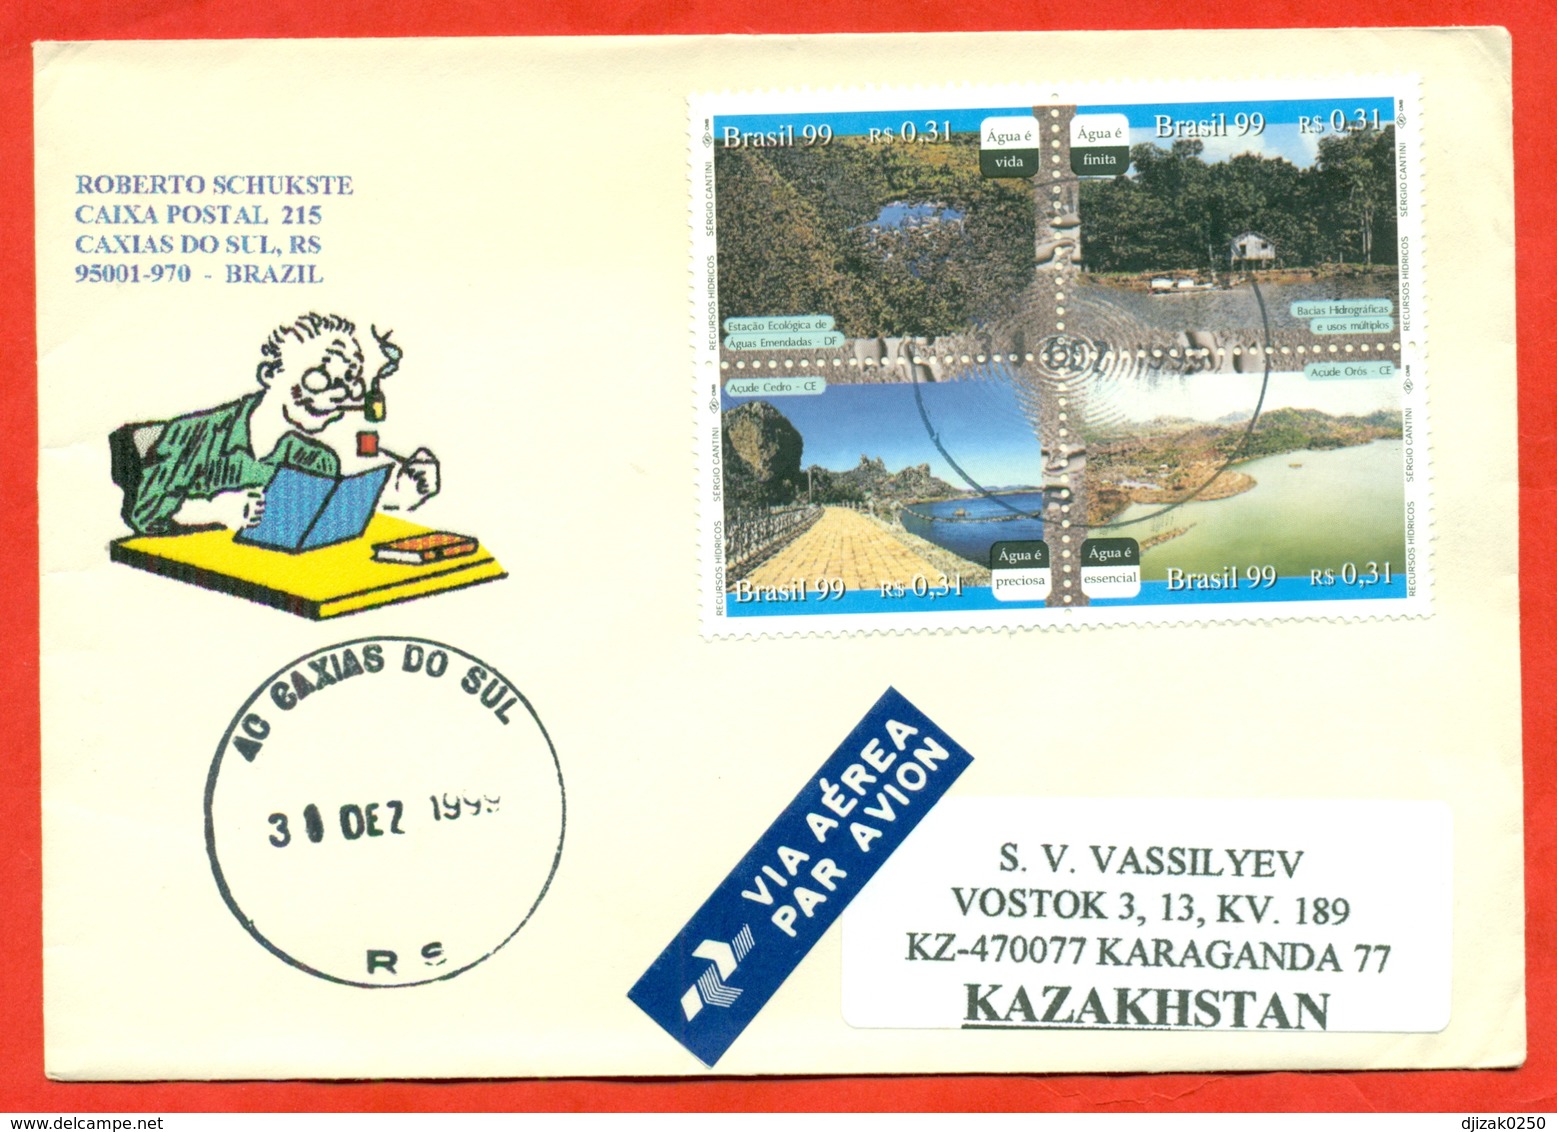 Brazil 1999 Water Resources. Envelope Passed The Mail.Airmail.Complete Series. - Covers & Documents